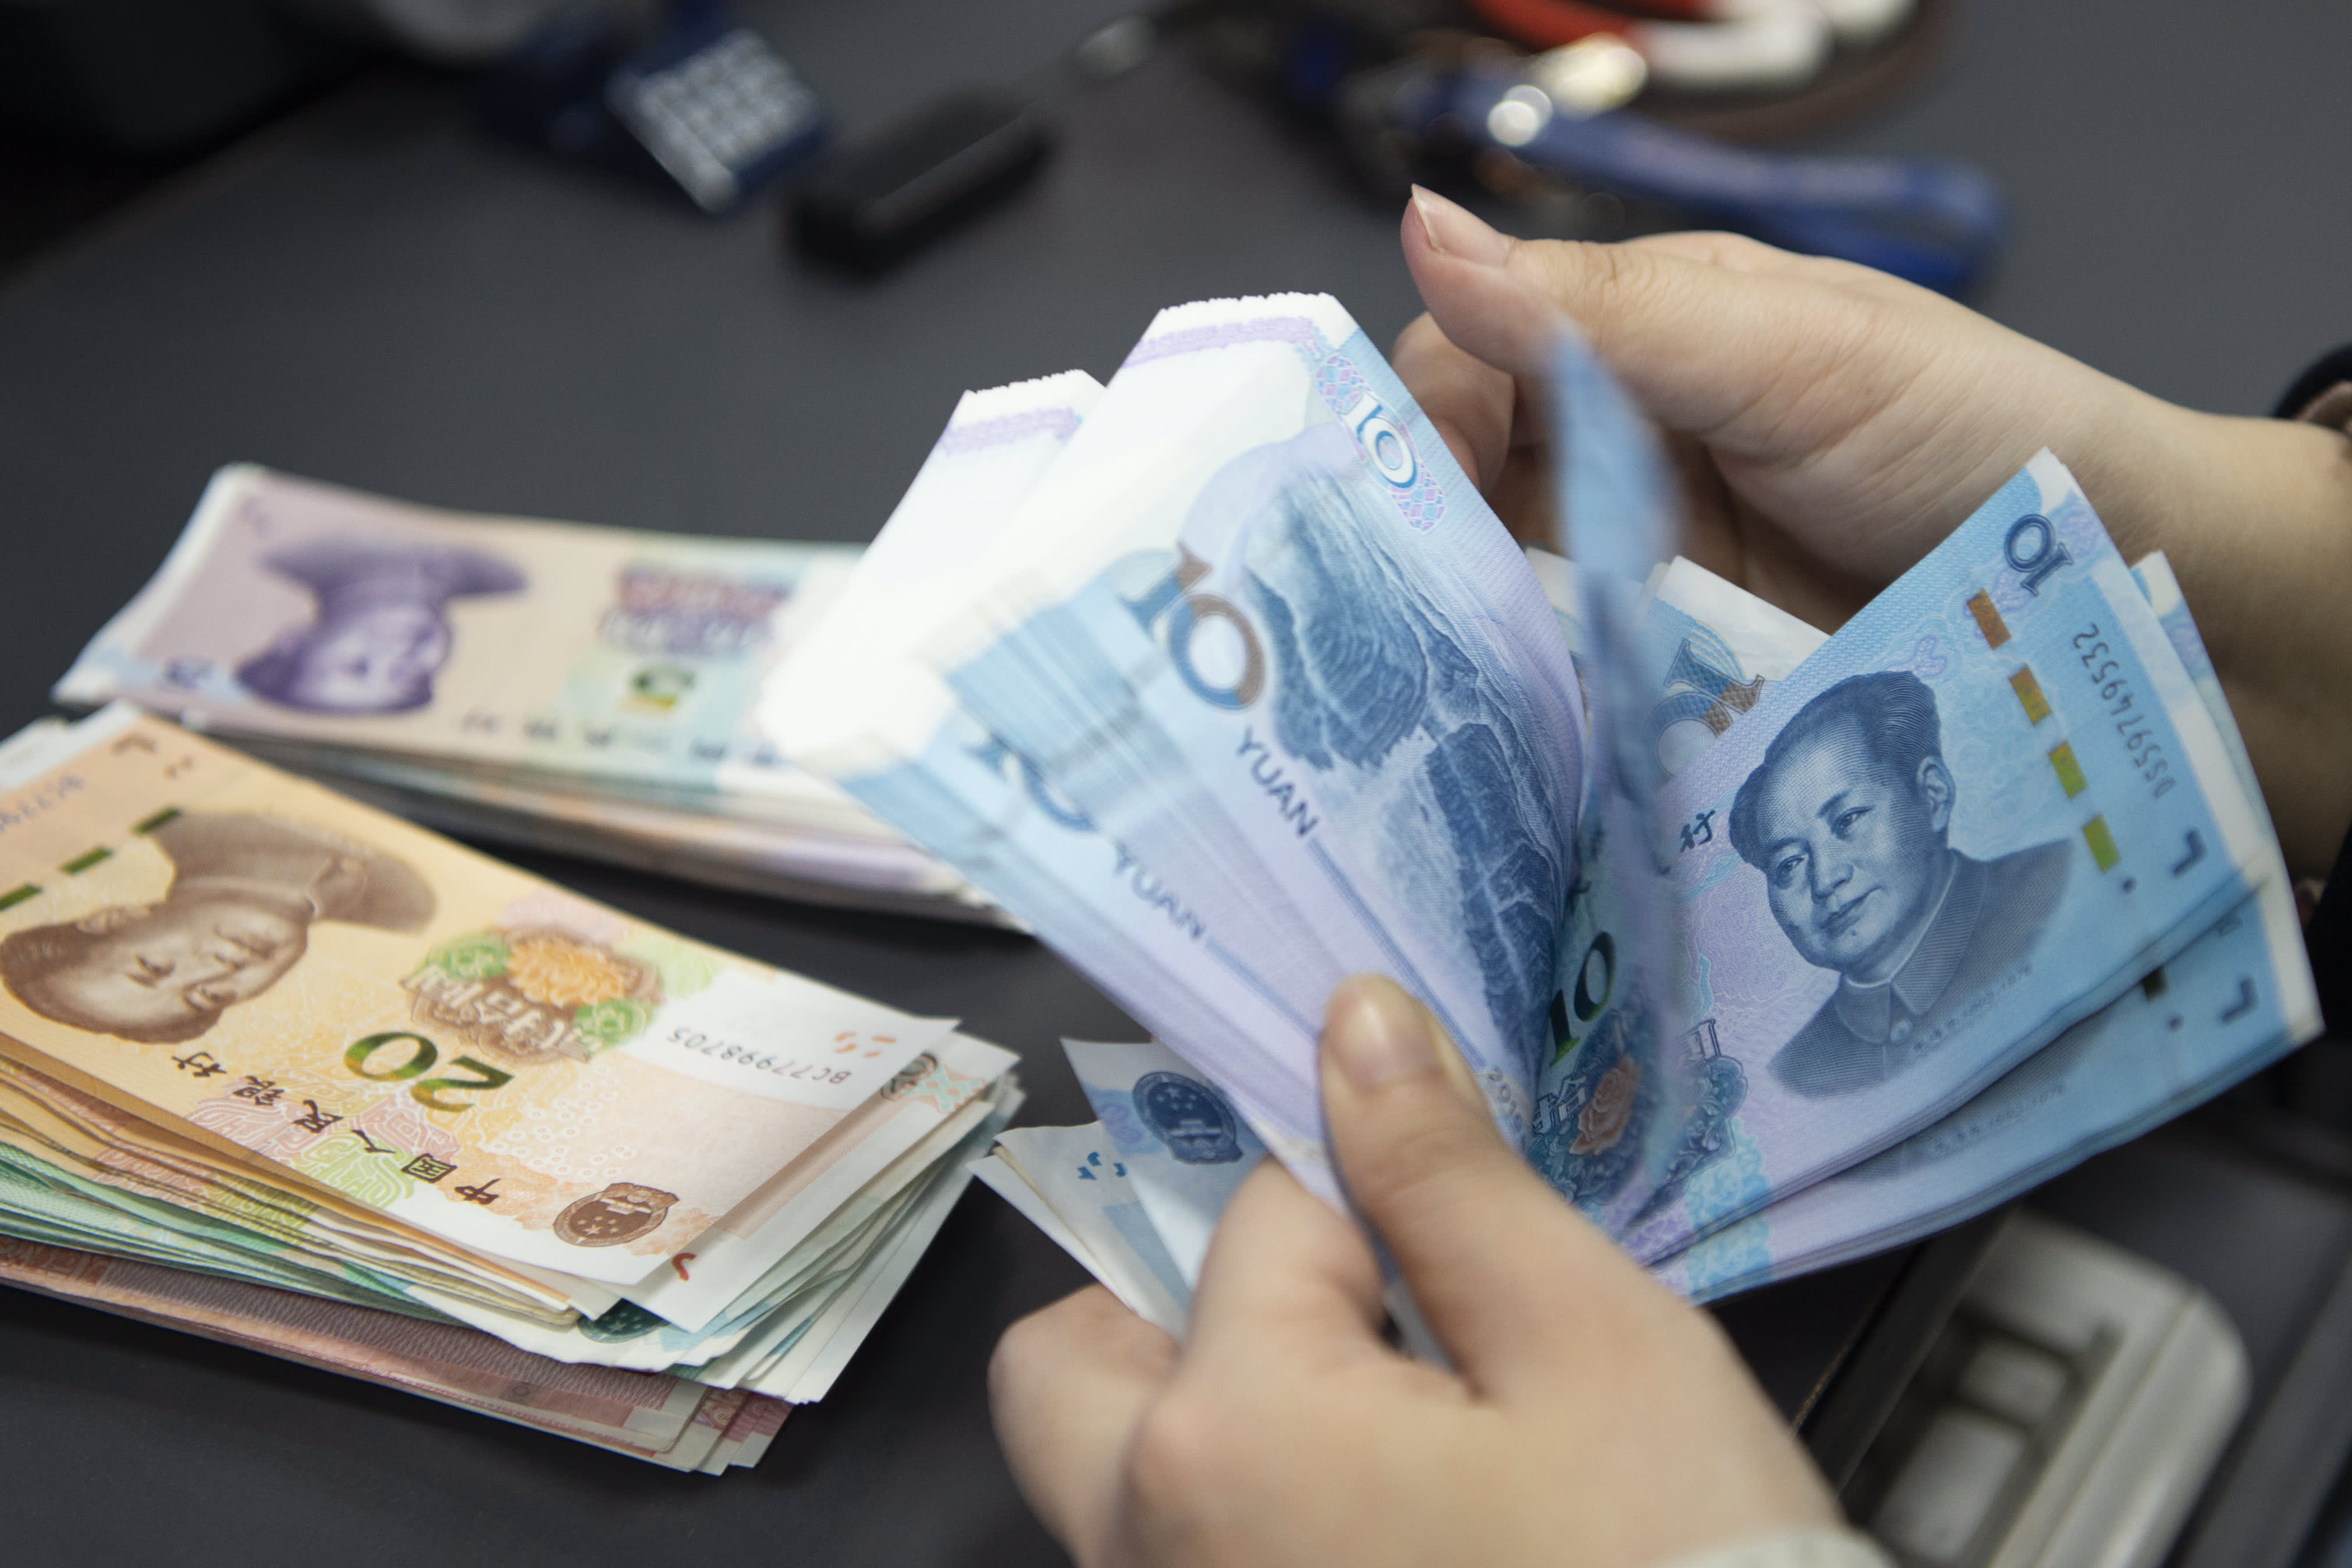 HAIAN, CHINA - JANUARY 24, 2024 - A staff member of the personal finance business area of a bank counts and arranges the RMB deposited by customers in the daily account in Haian city, Jiangsu province, China, Jan 24, 2024. (Photo credit should read CFOTO/Future Publishing via Getty Images)